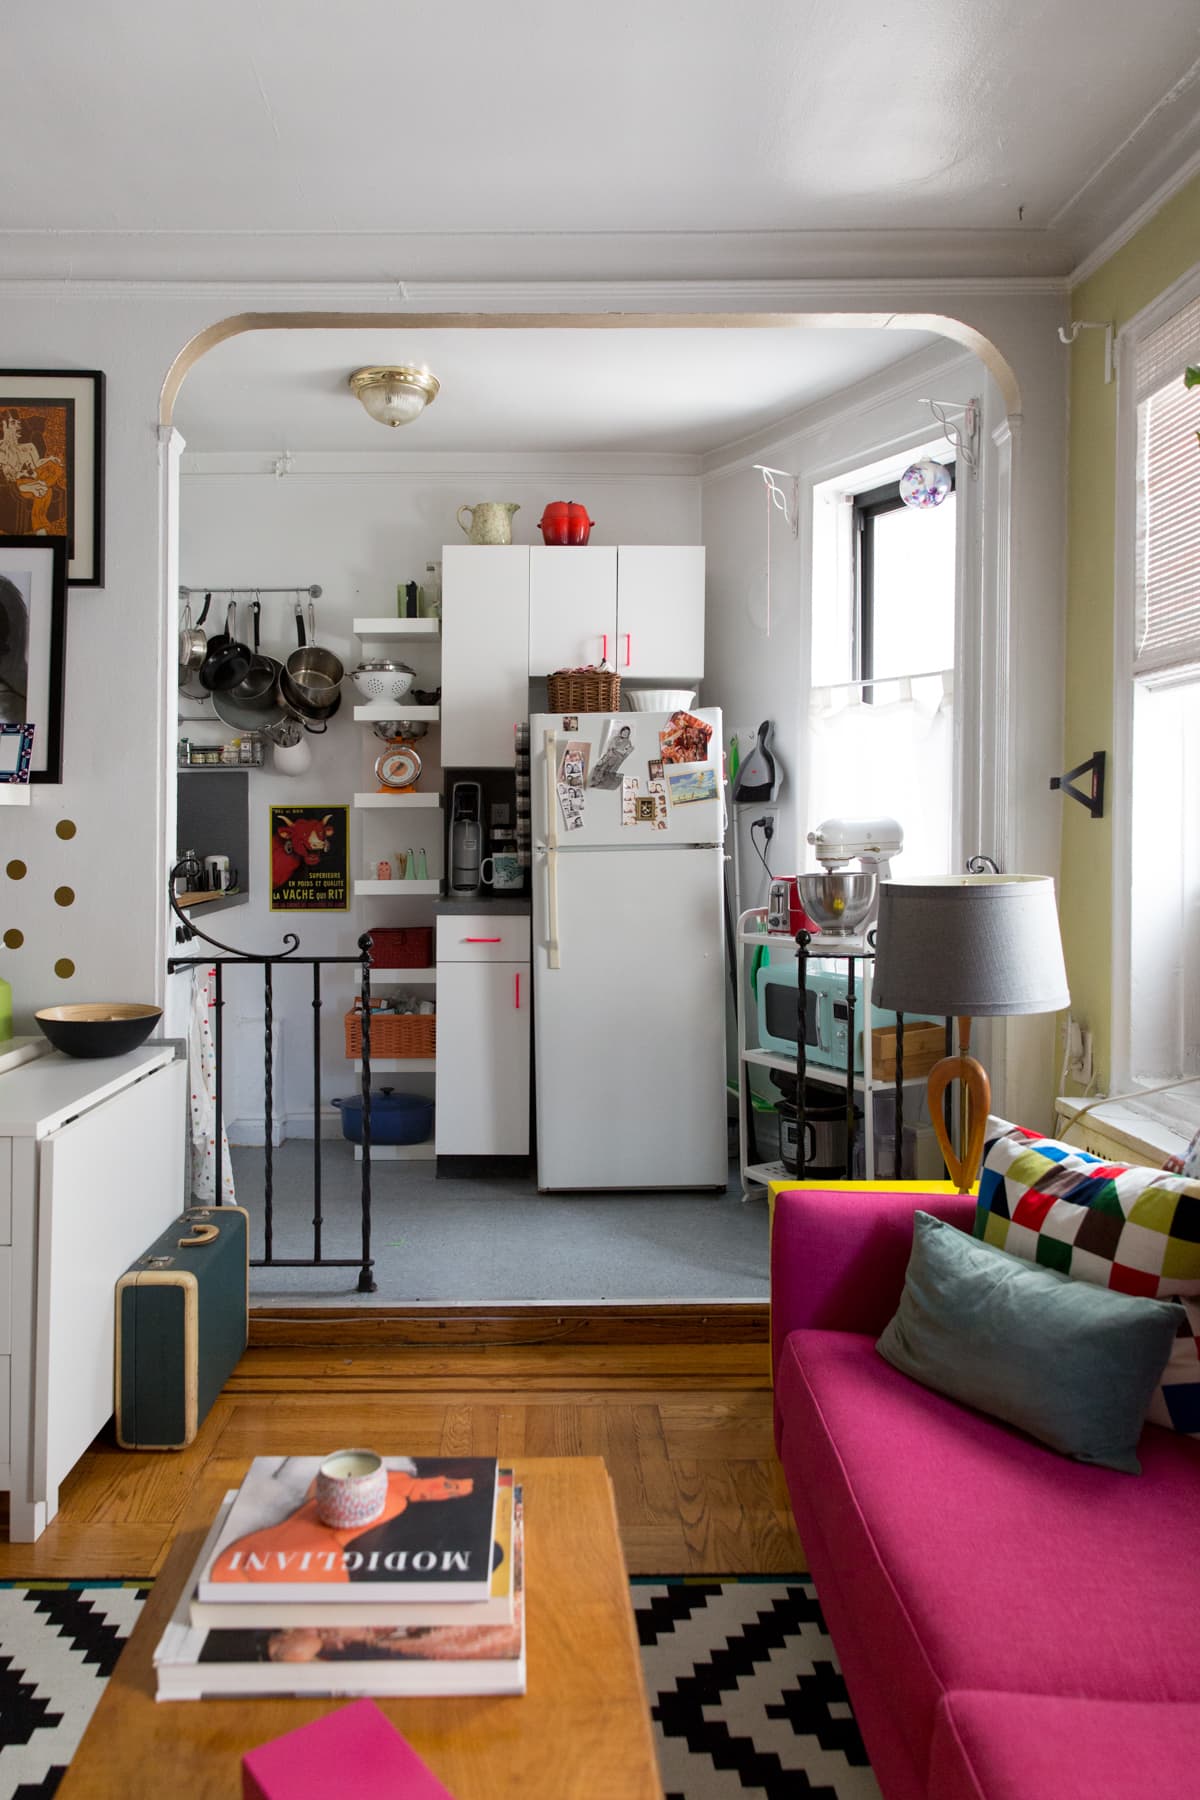 New York Studio Apartment Tour: A Small, Colorful Home | Apartment Therapy